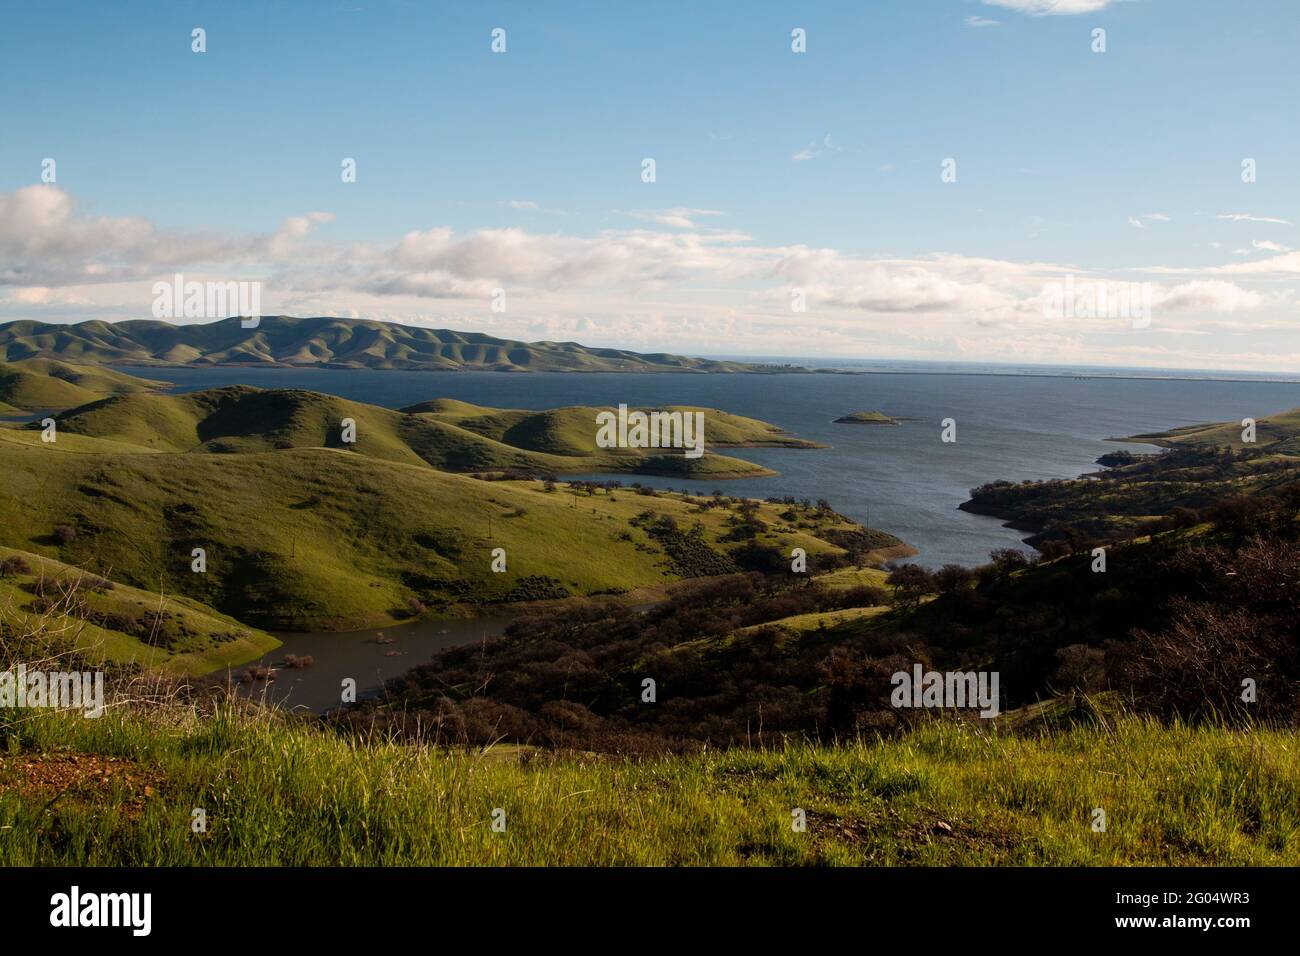 The San Luis Reservoir, located in Merced County, is an artificial lake, constructed to store irrigation water.  It is California's 5th largest lake. Stock Photo